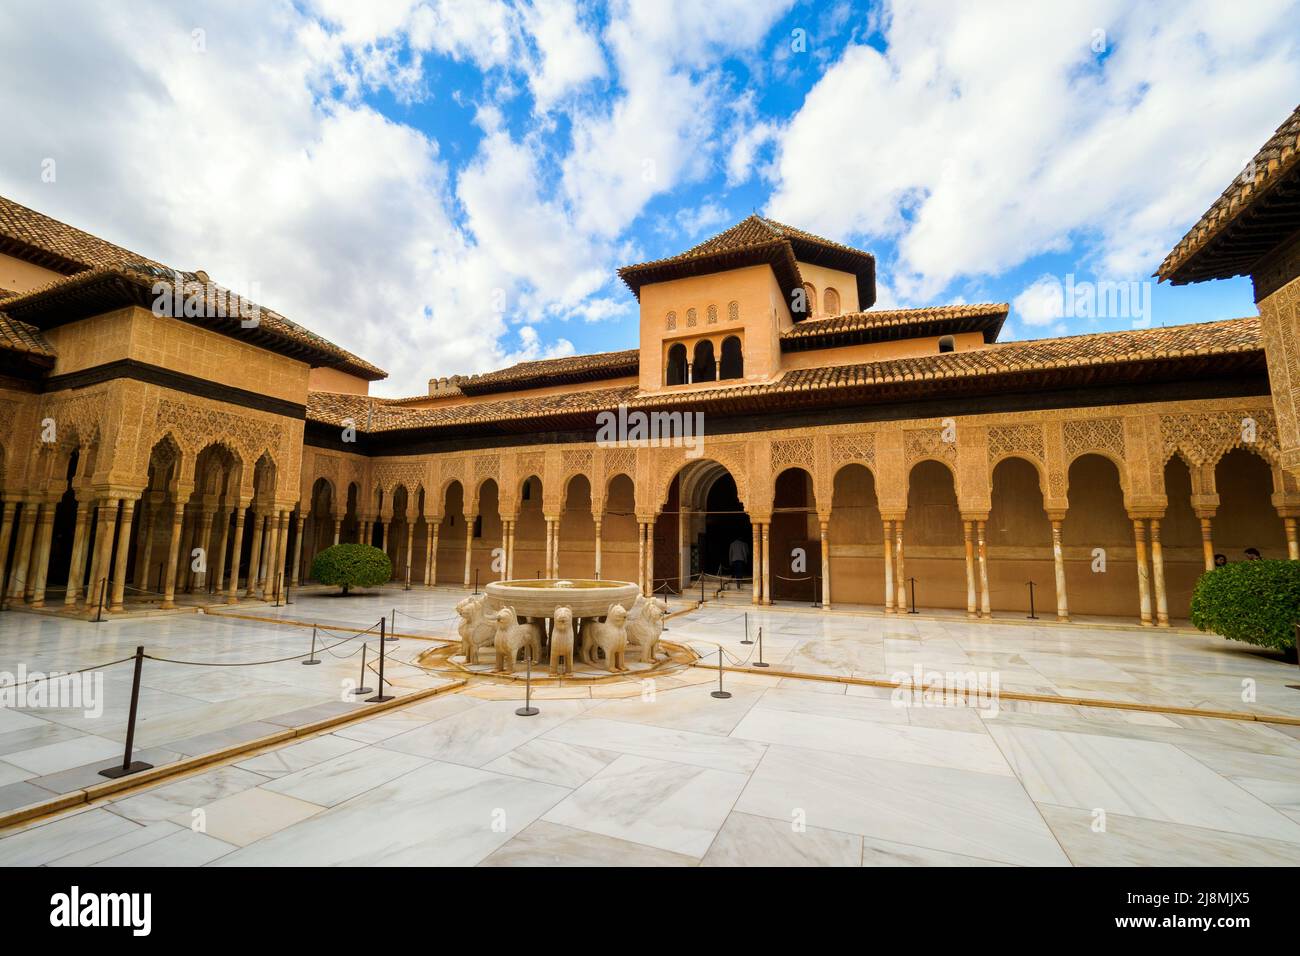 Court of the Lions in the Nasrid royal palaces - Alhambra complex - Granada, Spain Stock Photo